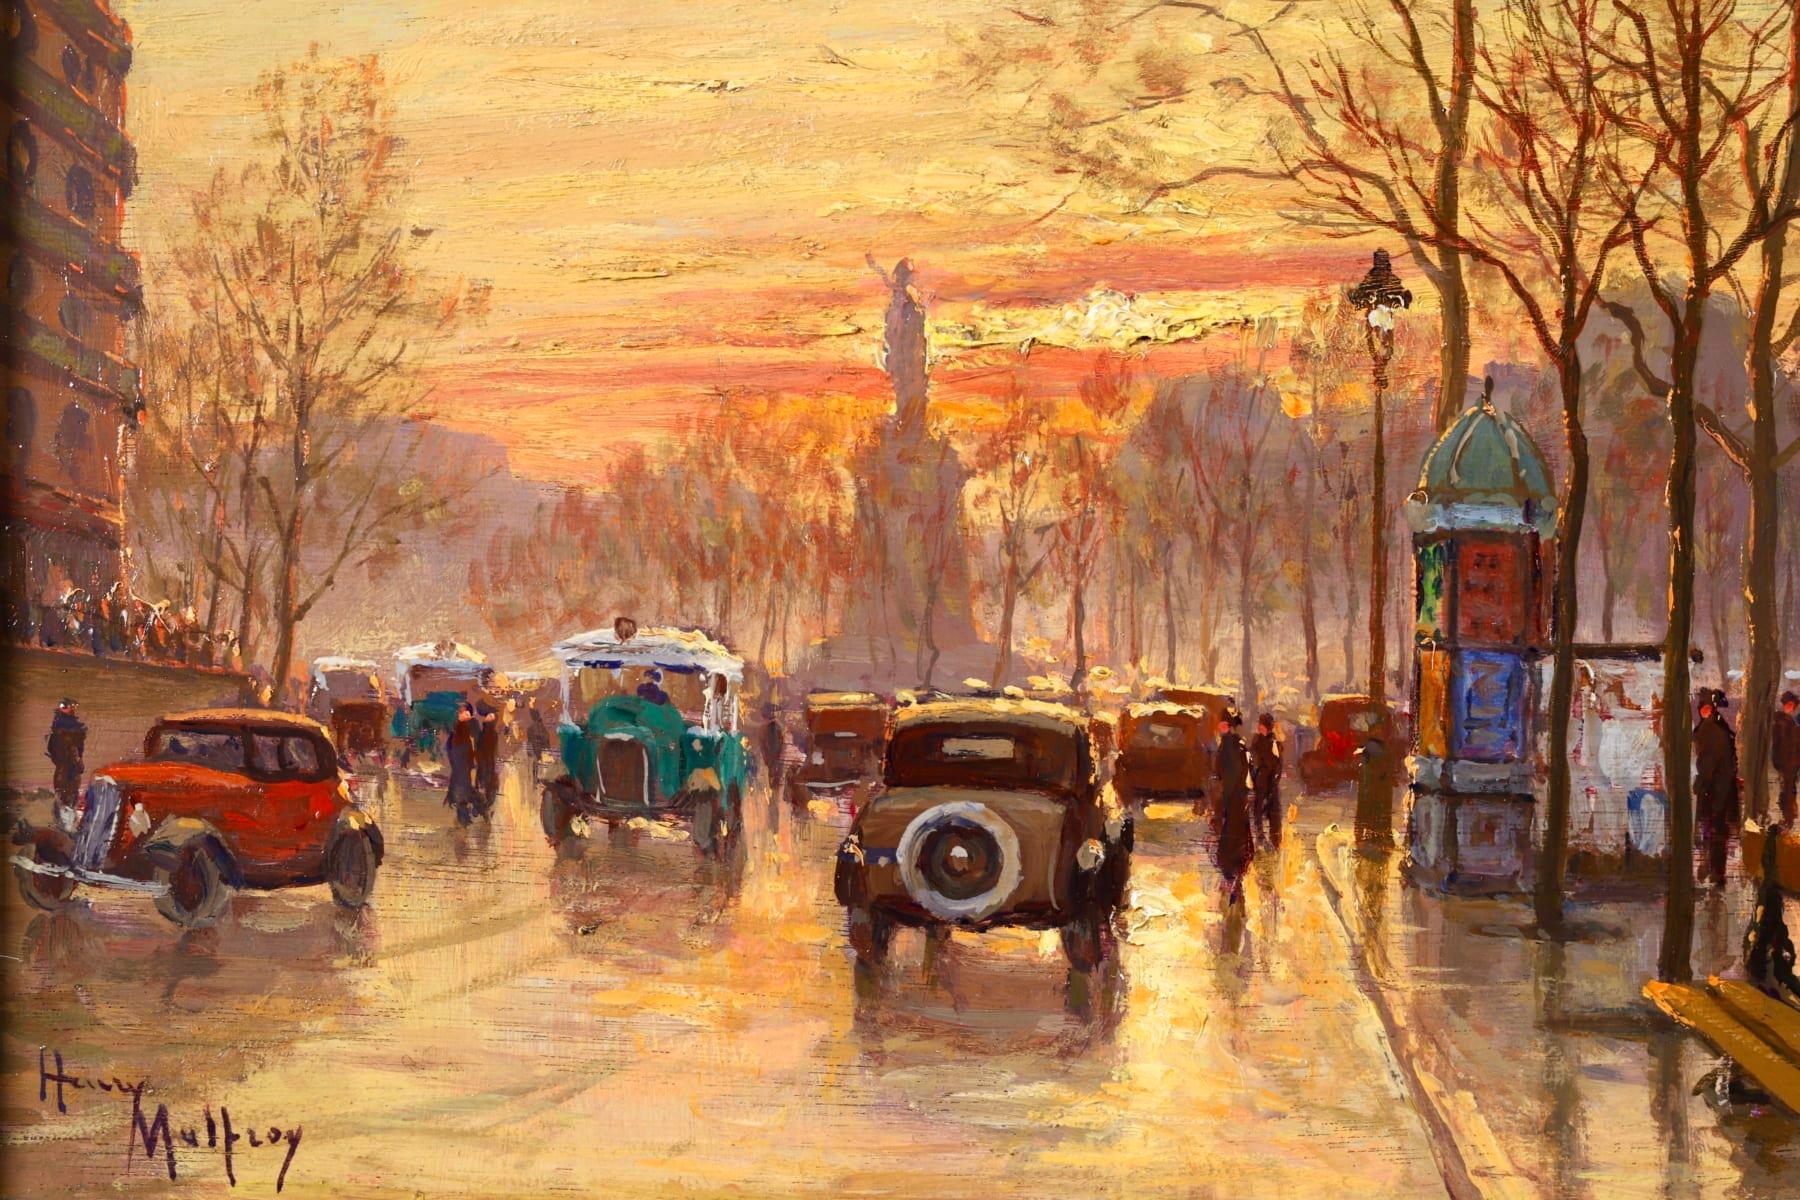 Sunset - Paris - Post Impressionist Oil, Figutres in Cityscape by Henry Malfroy 8